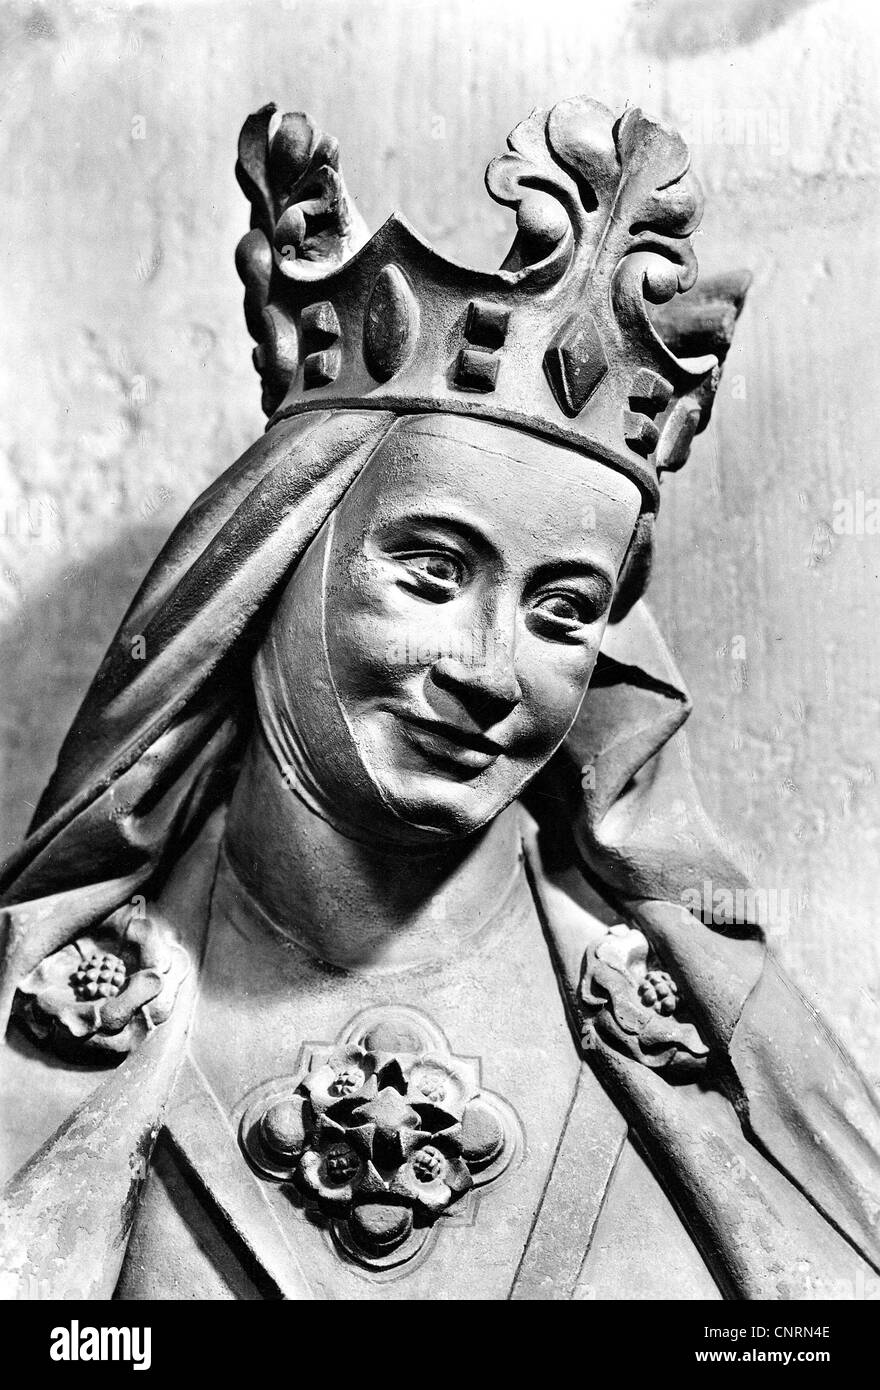 Adelaide, 931 - 16.12.999, Holy Roman Empress 2.2.962 - 7.5.973, portrait, sculpture in the Meissen Cathedral, detail, circa 1260, , Stock Photo